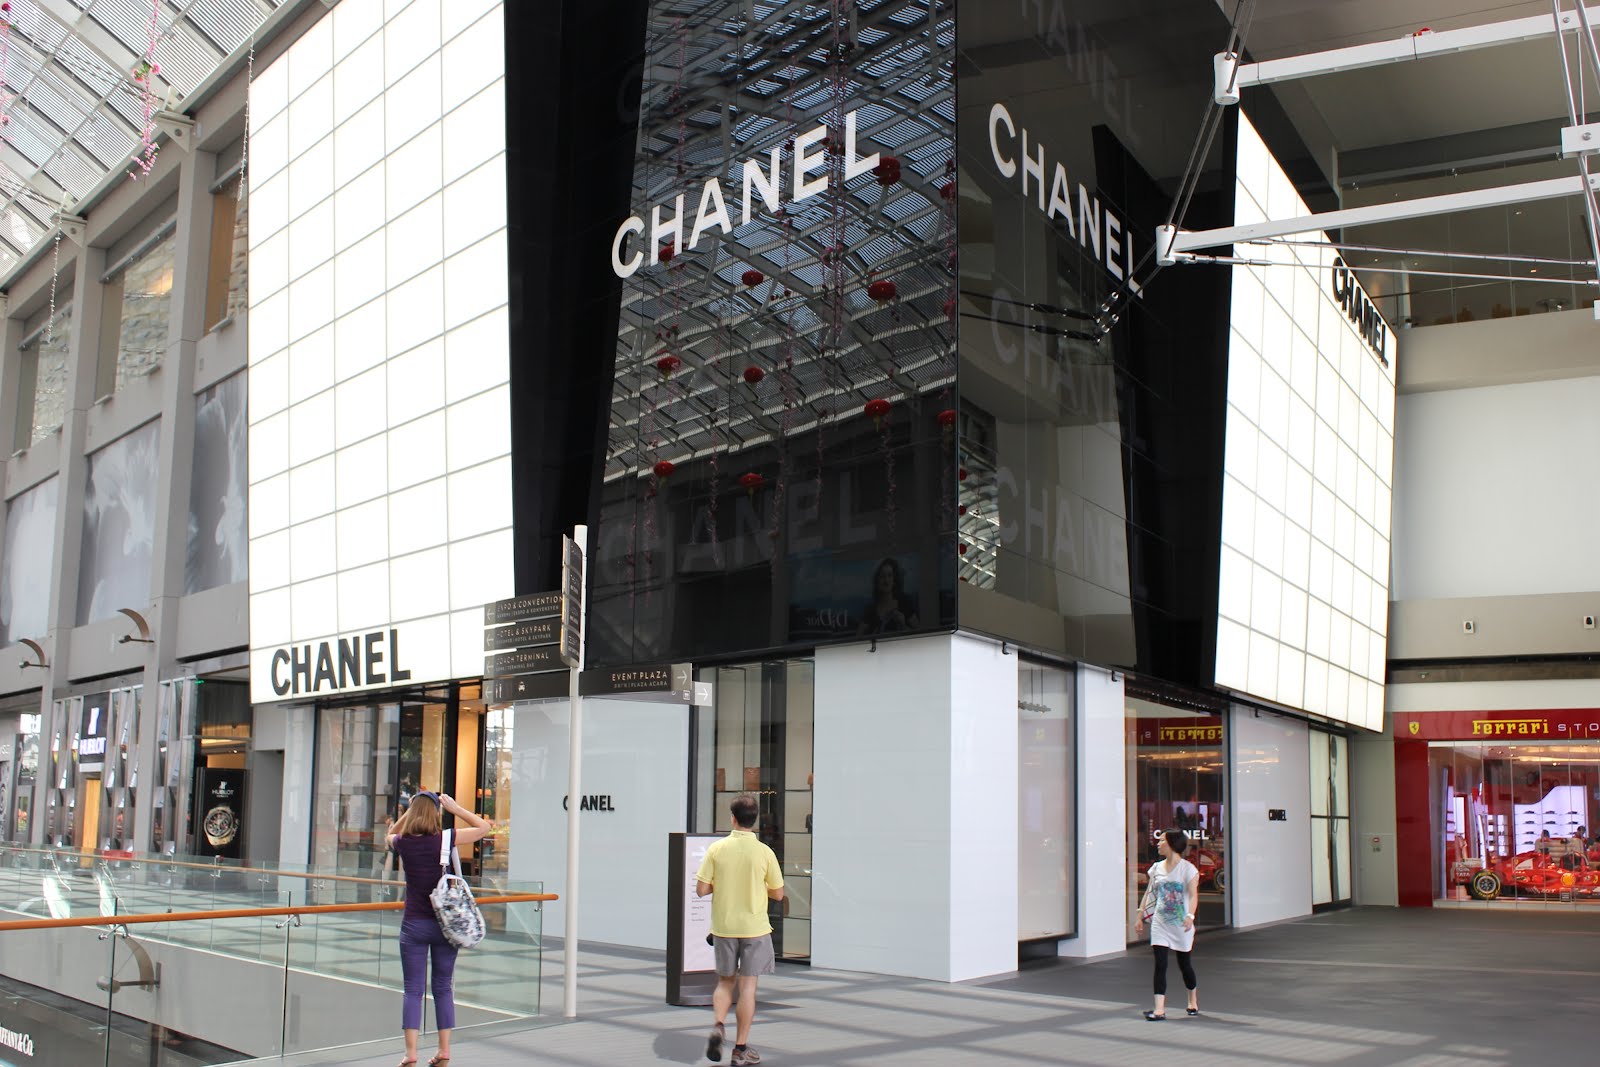 displayhunter: Chanel: The Shoppes at Marina Bay Sands, clear one